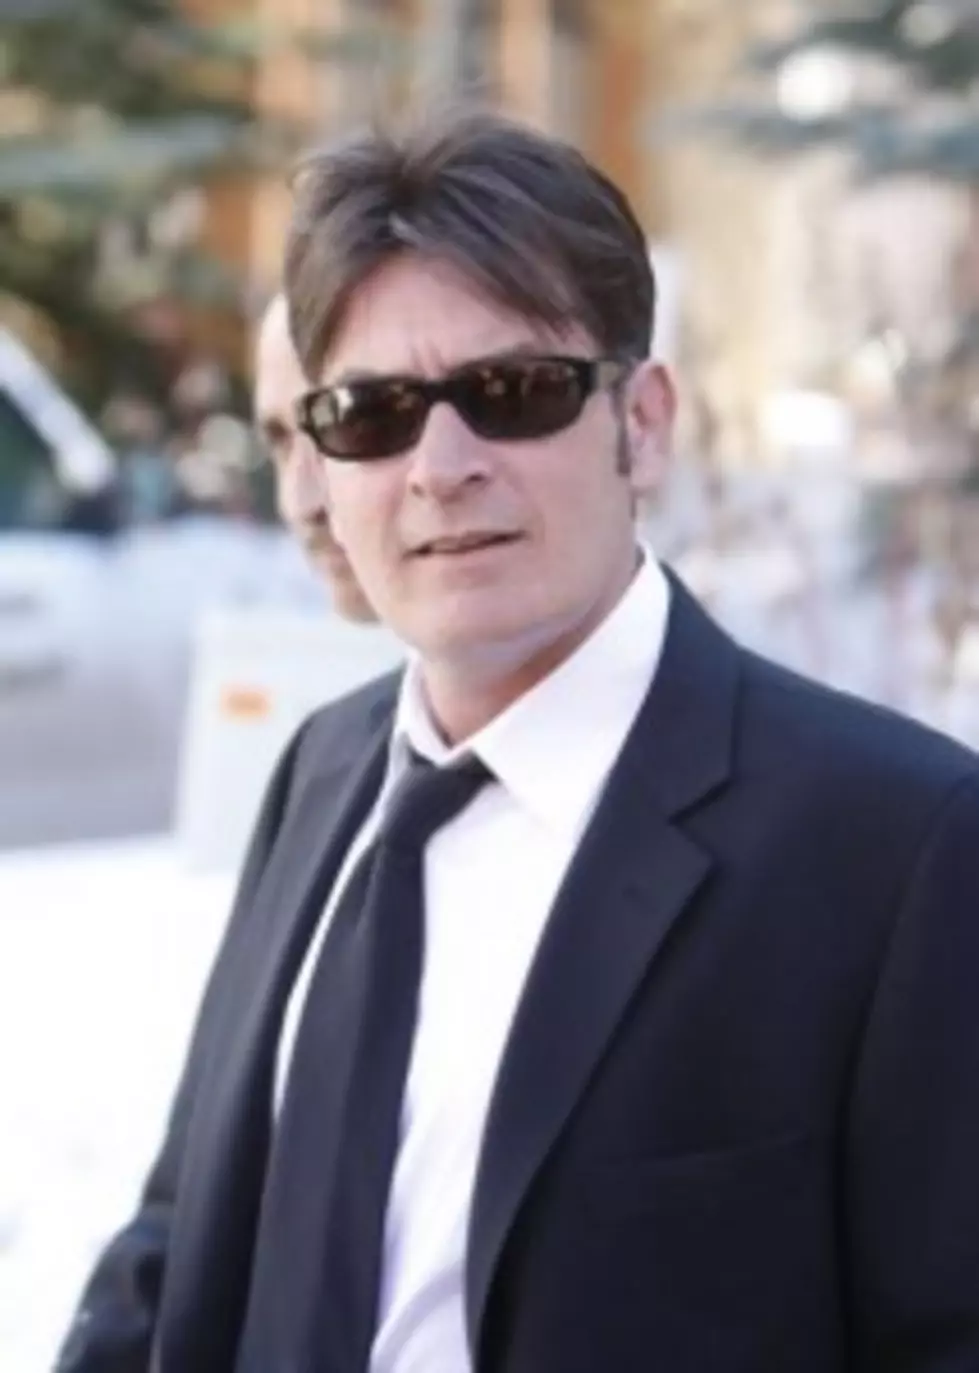 Charlie Sheen is a Halloween Costume